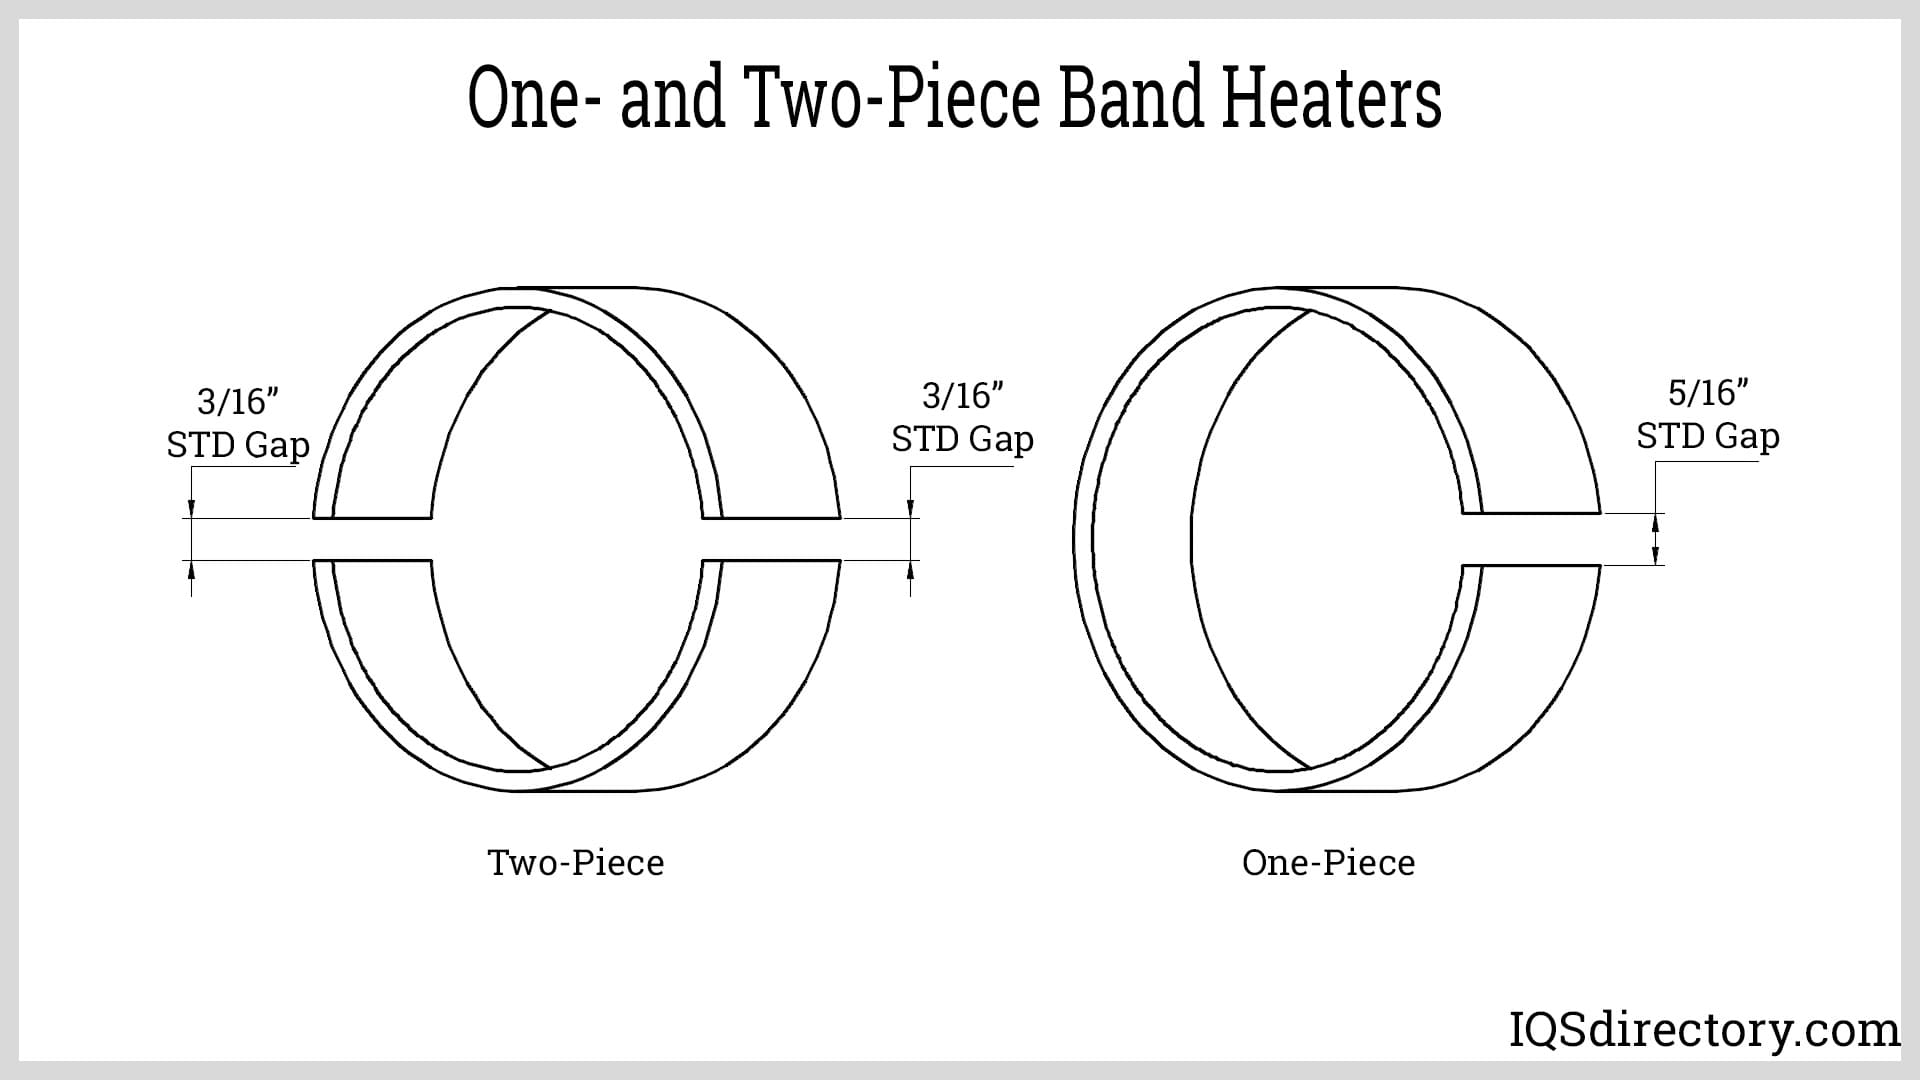 One- and Two-Piece Band Heaters